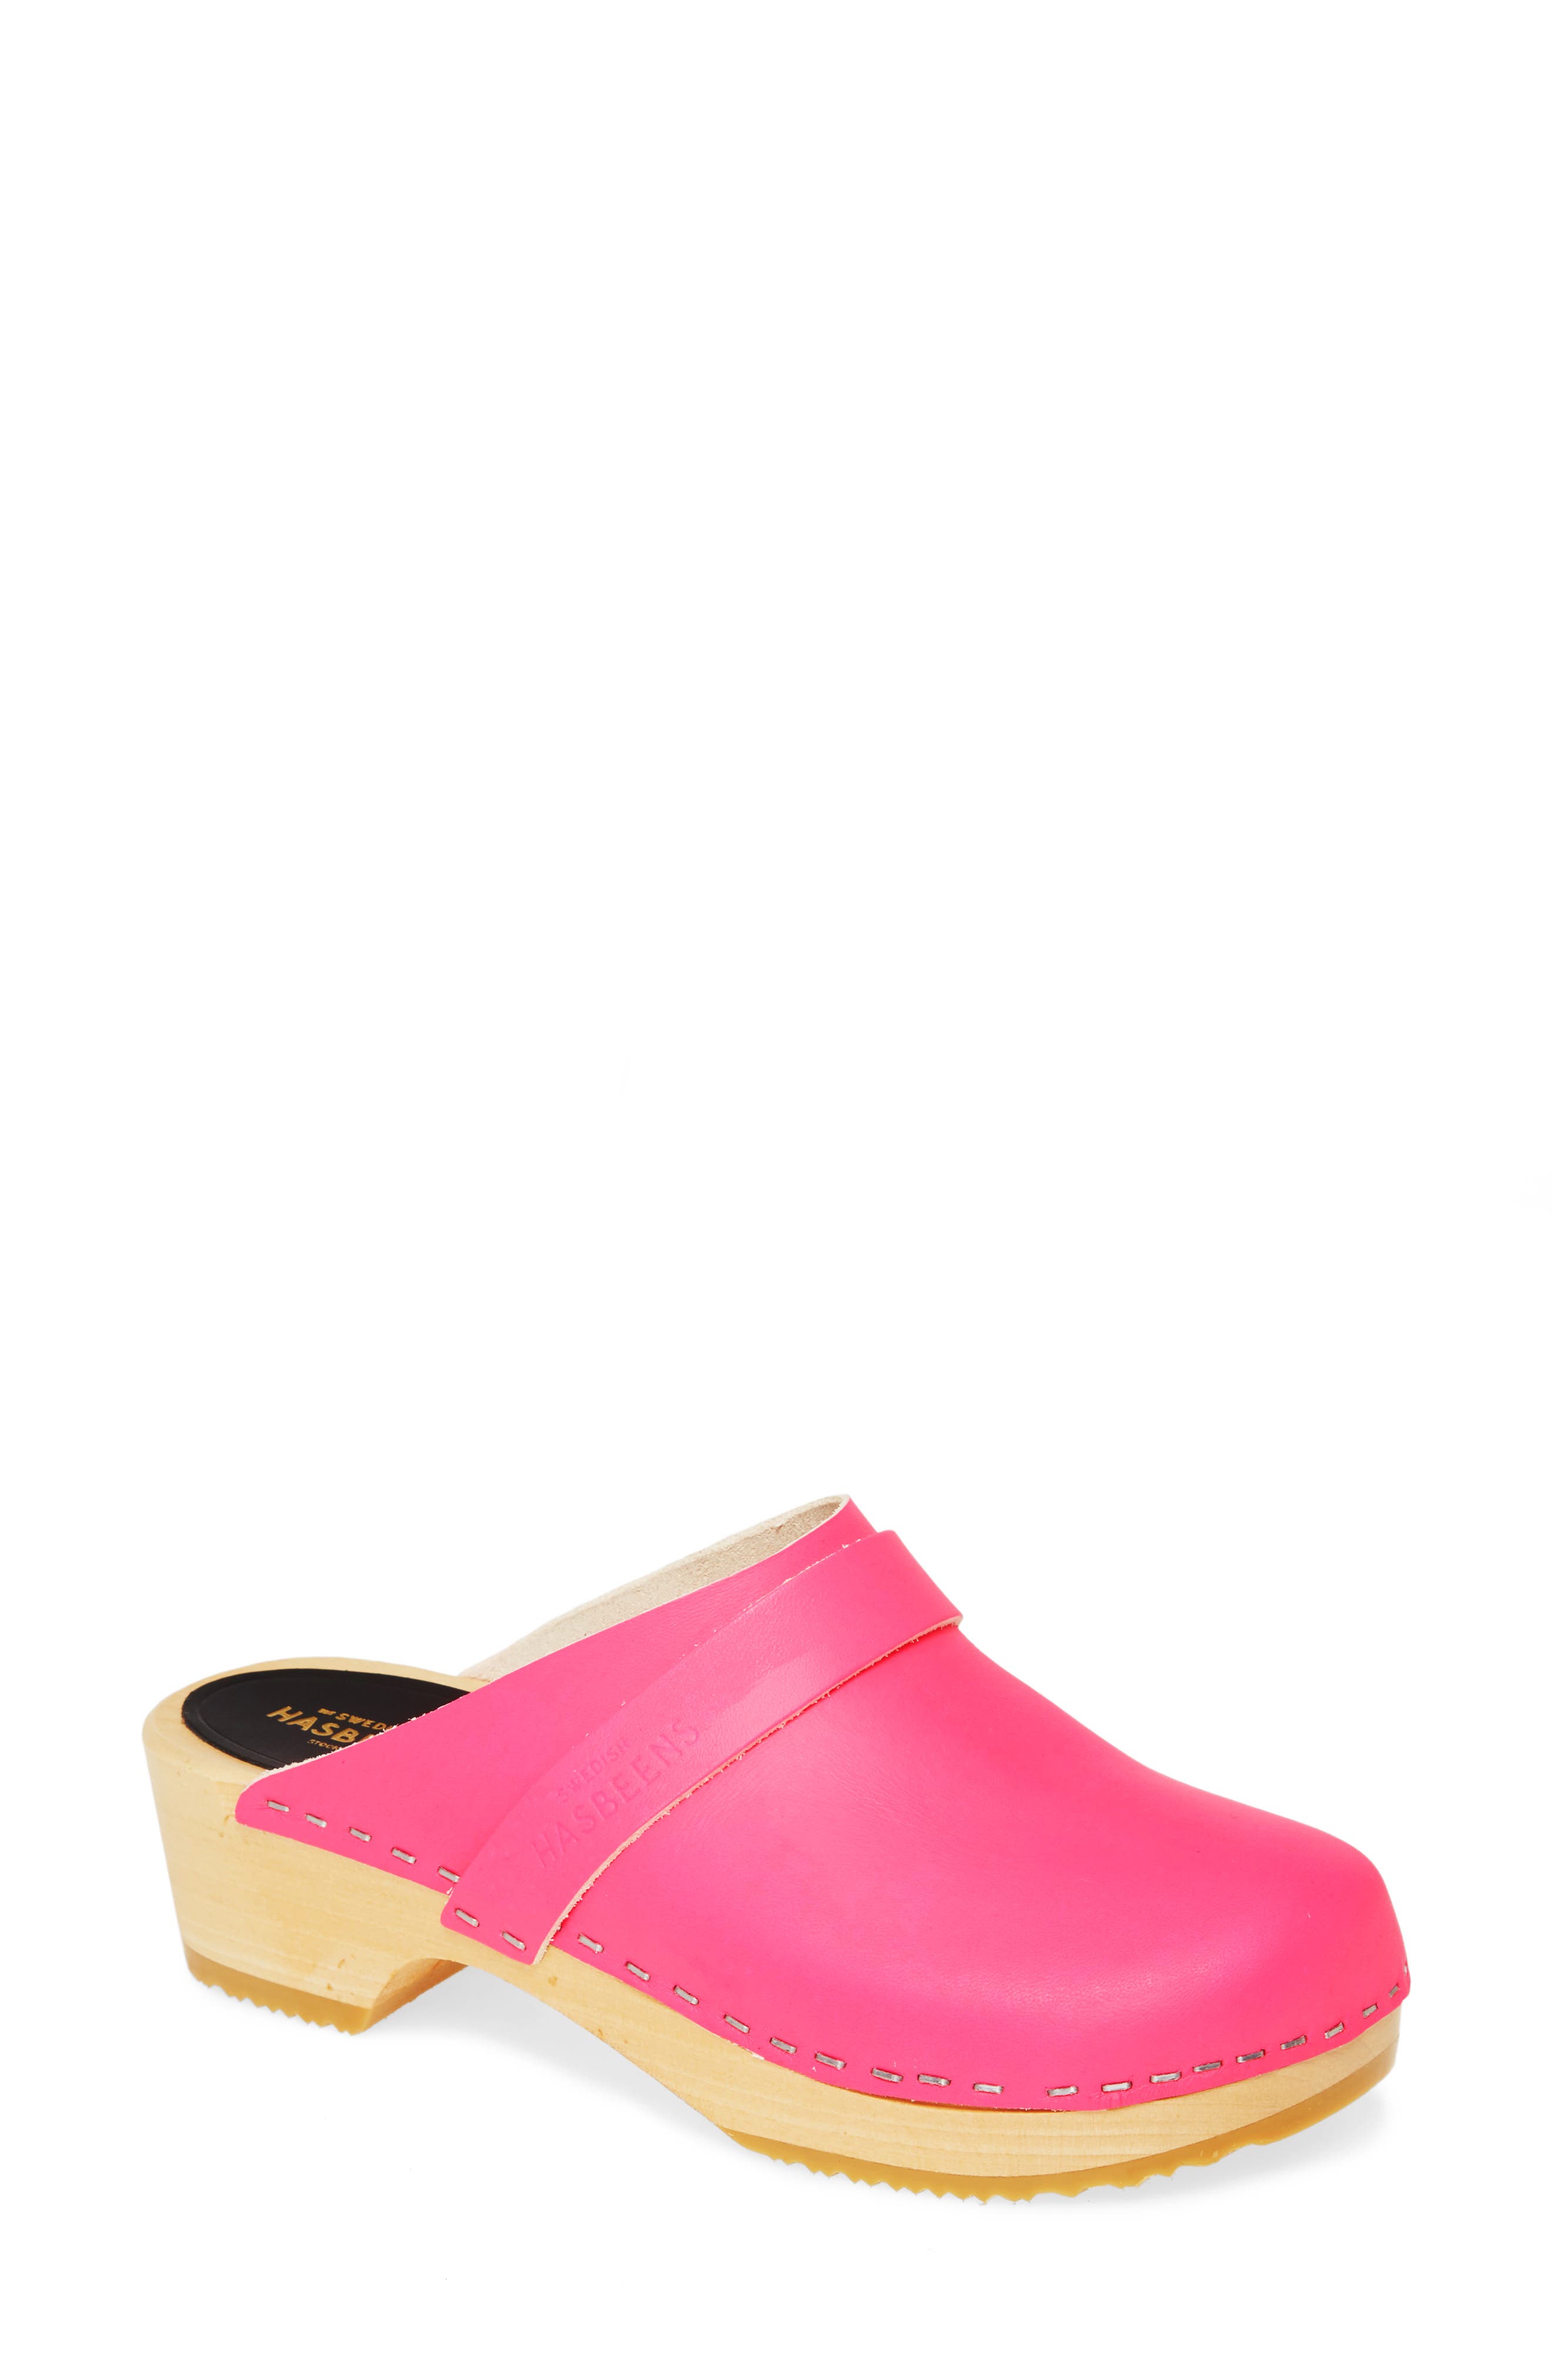 Women's Pink Swedish Hasbeens Shoes 